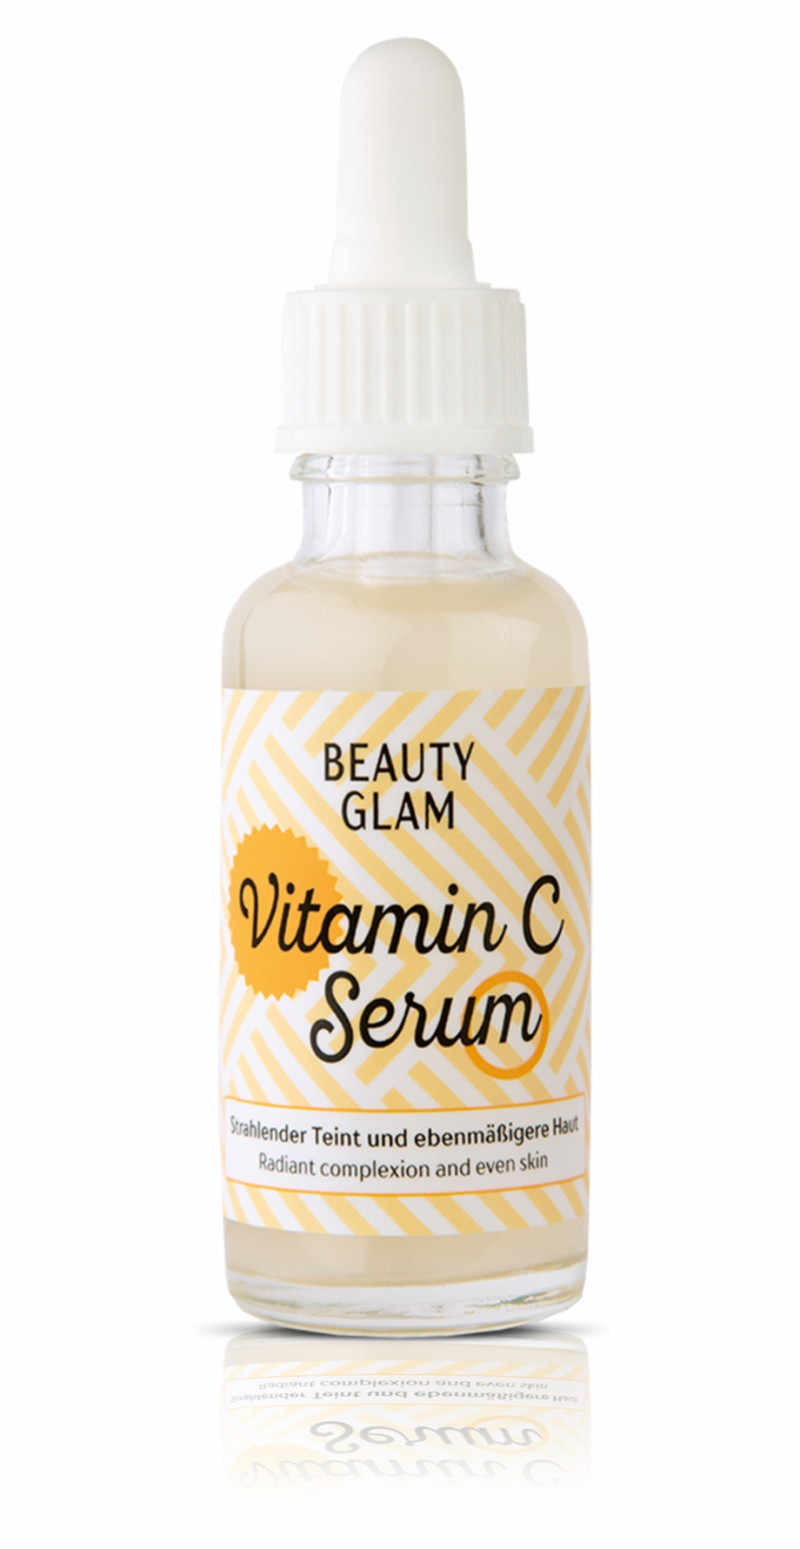 Vitamin C Serum | BEAUTY GLAM it for a days and then got a massive - We Are cosmetic reviews.